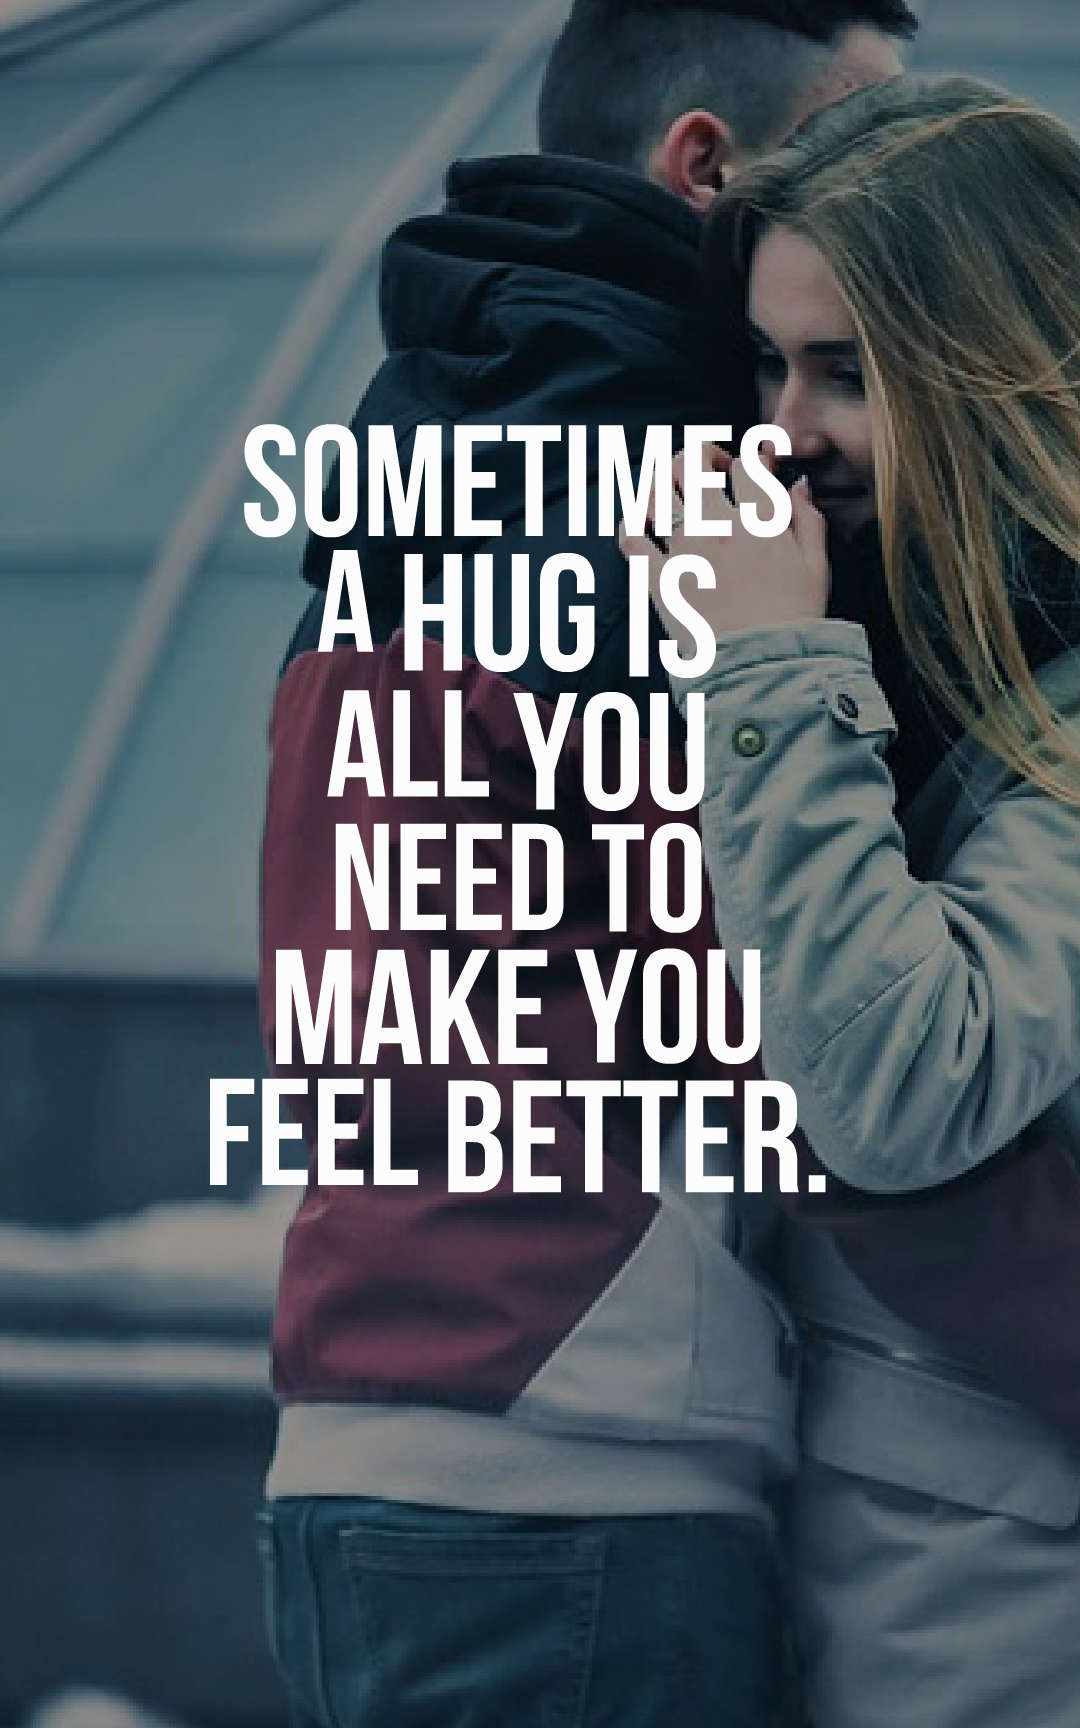 Hug Quote Images - 30 Hug Quotes On Spreading Love And Soothing The